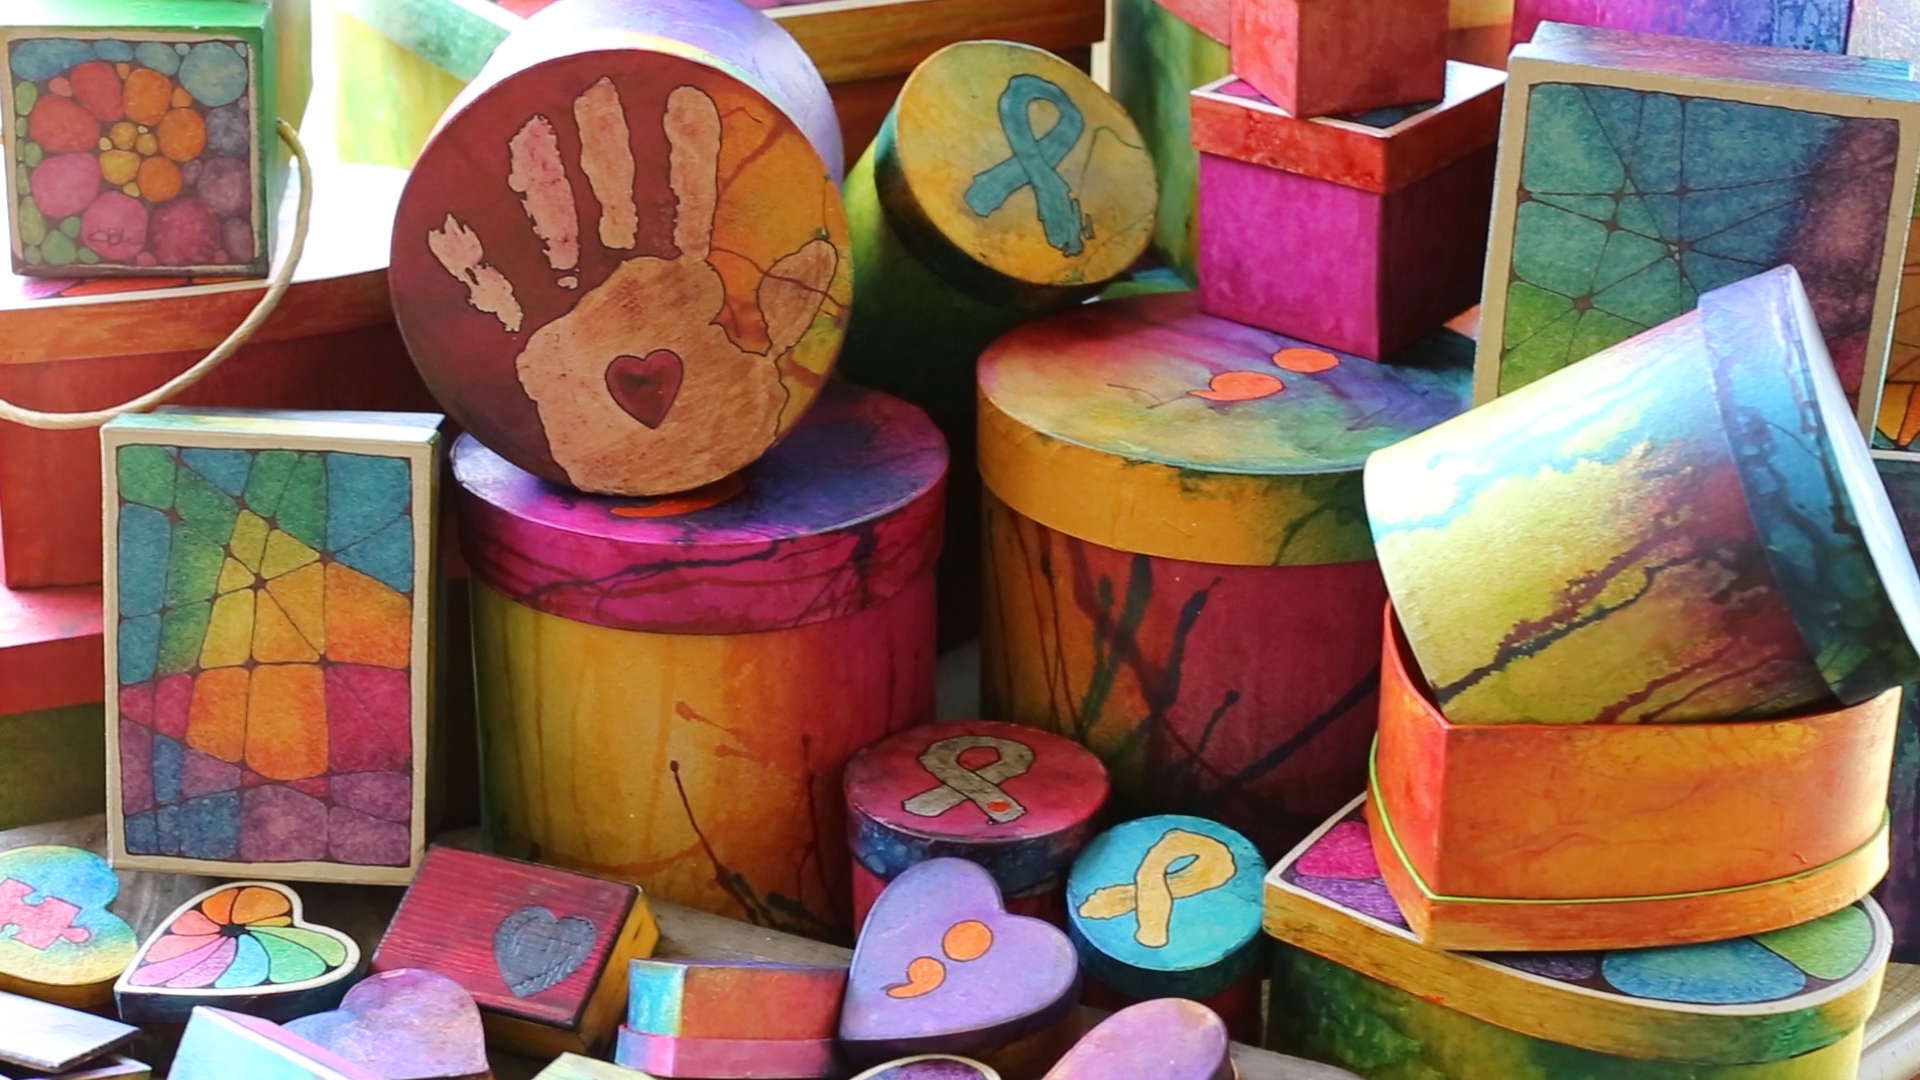 Artistic one-of-a-kind gift boxes spread awareness of timely causes.